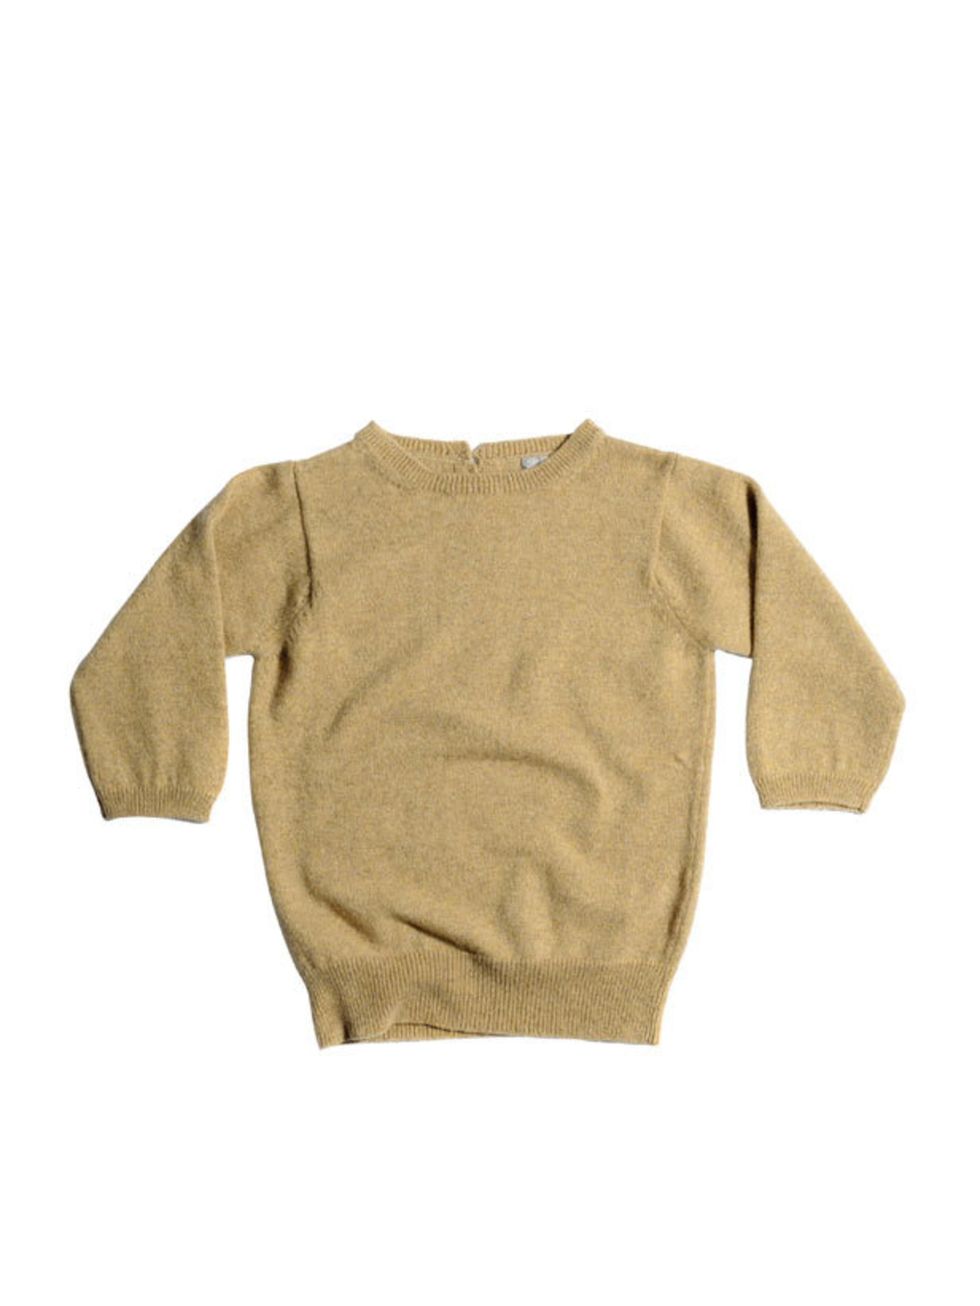 <p>Nail two trends in one with a camel cropped jumper. It nods to fashions current favourite 1950s vibe and is also one of the most versatile pieces around. Margaret Howell cashmere sweater, £195, call 0207 009 9009 for stockists </p>